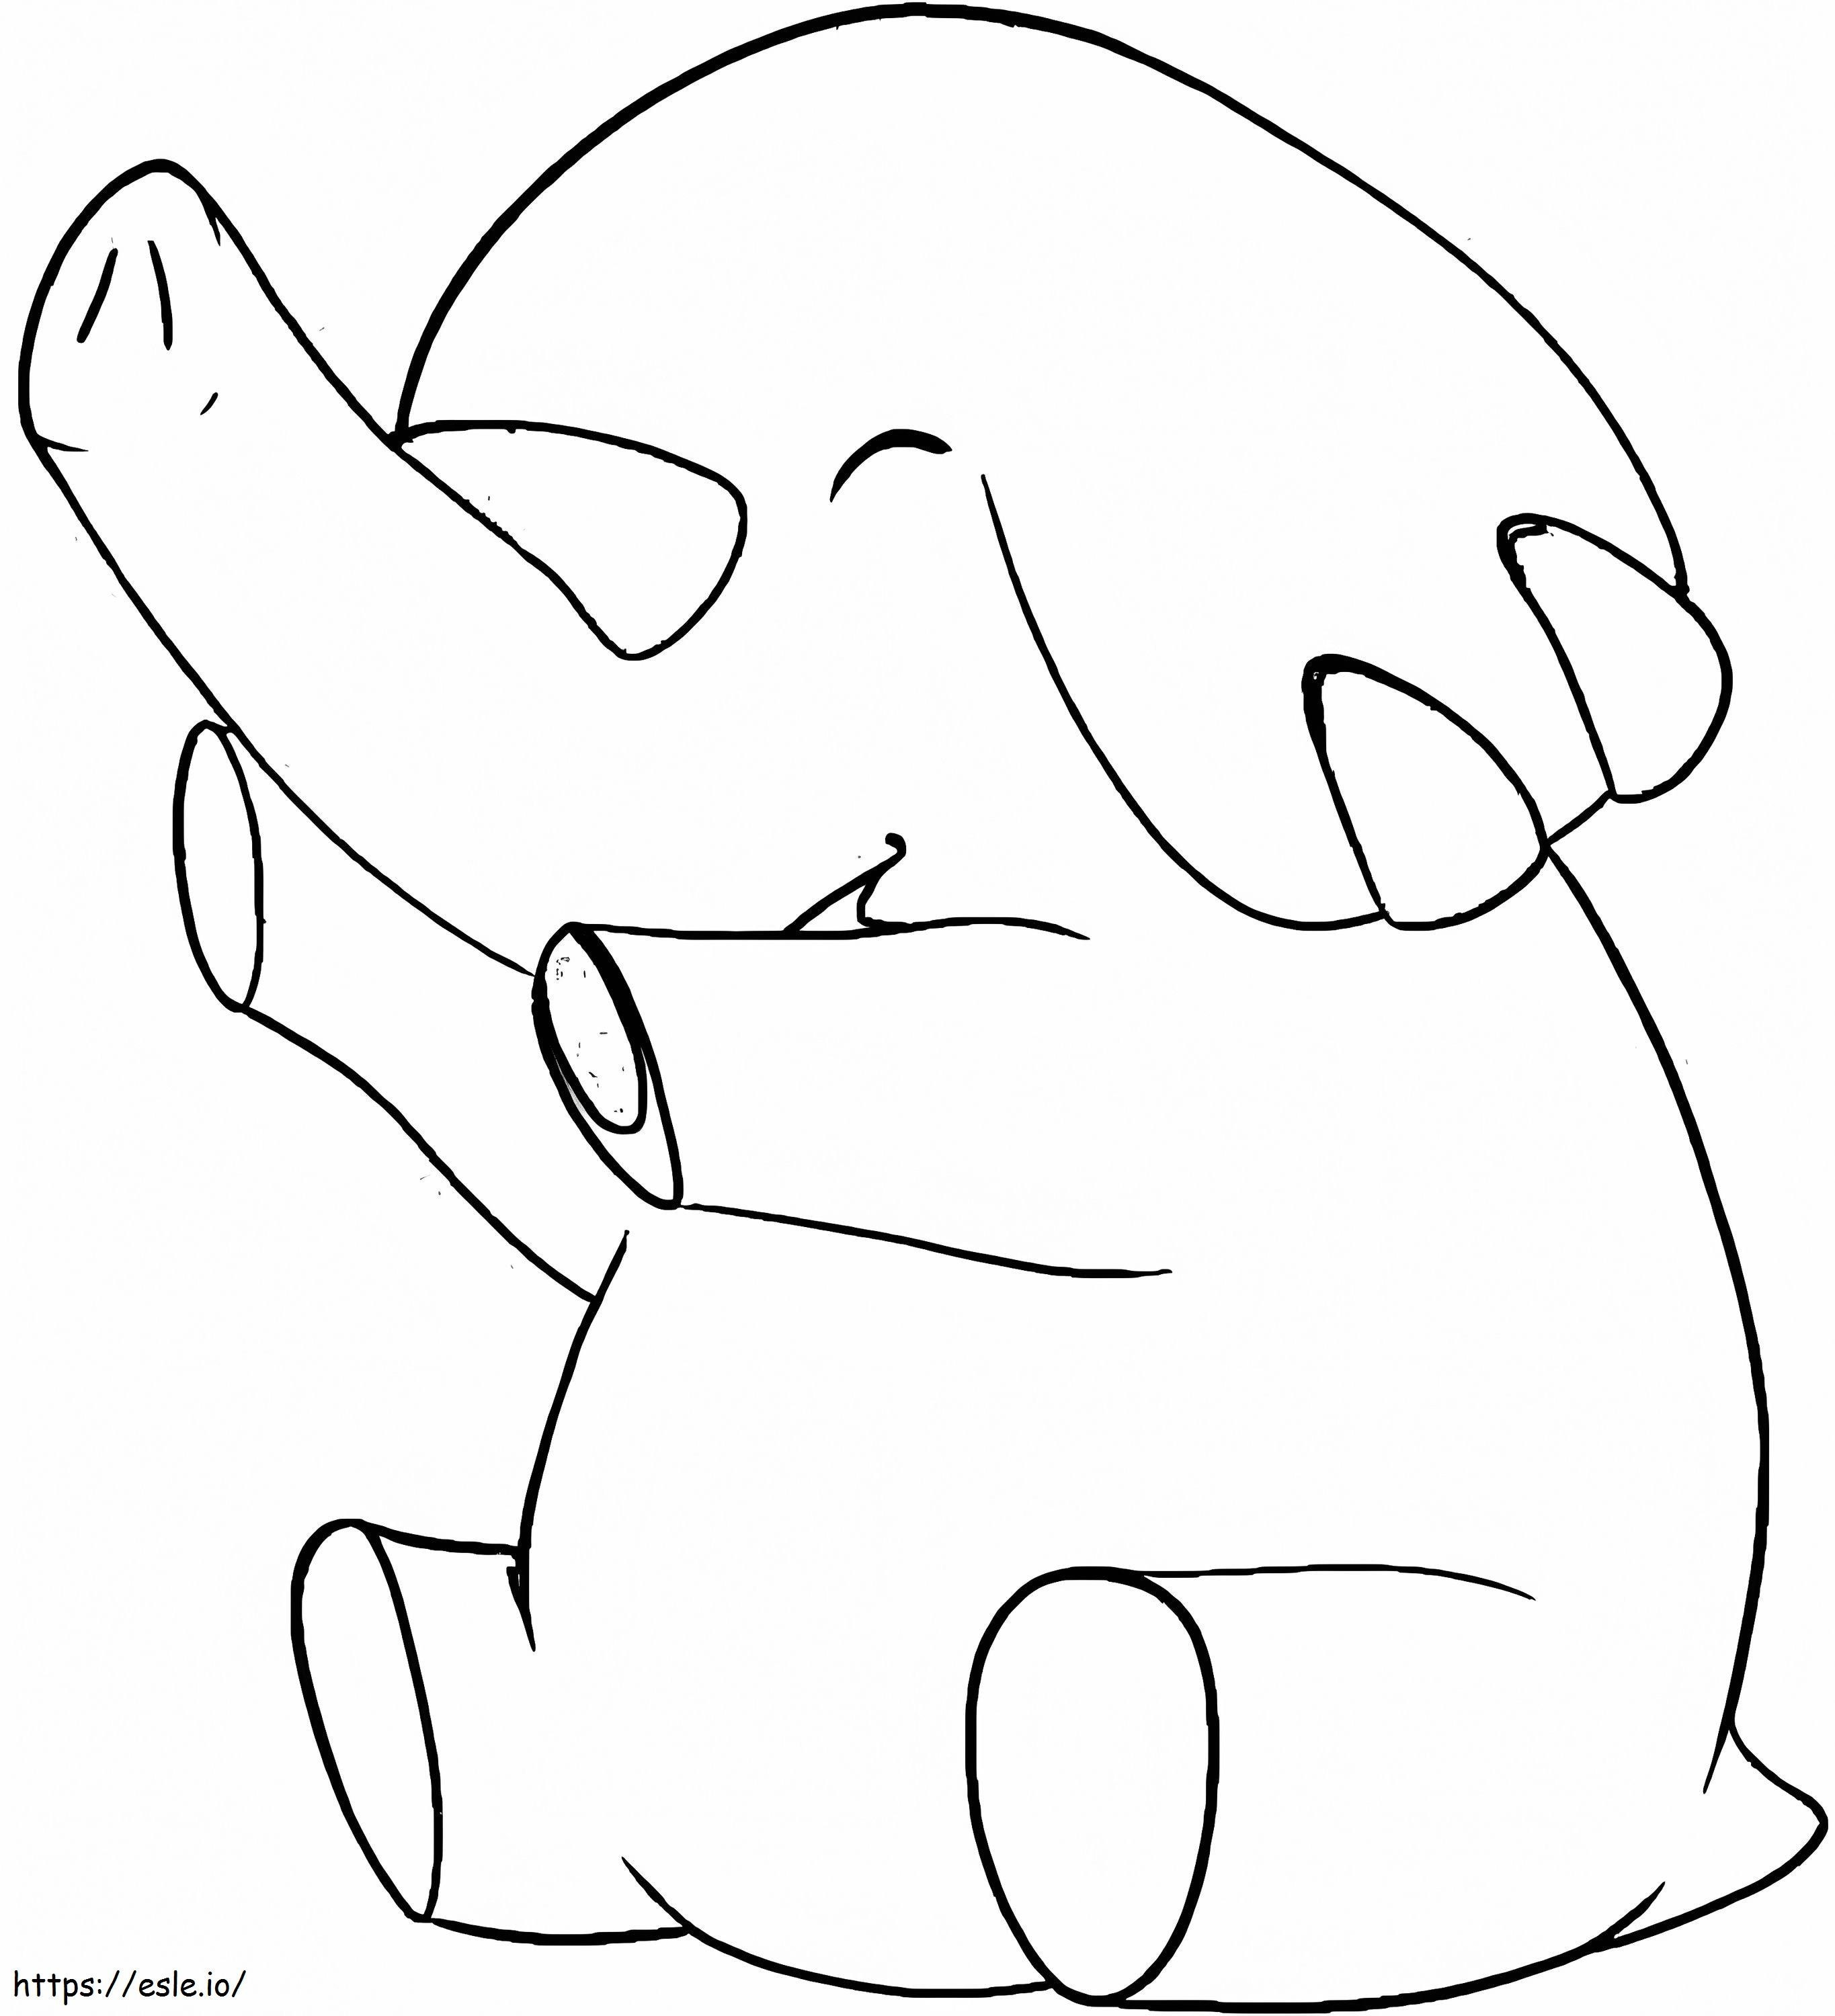 Adorable Phanpy coloring page